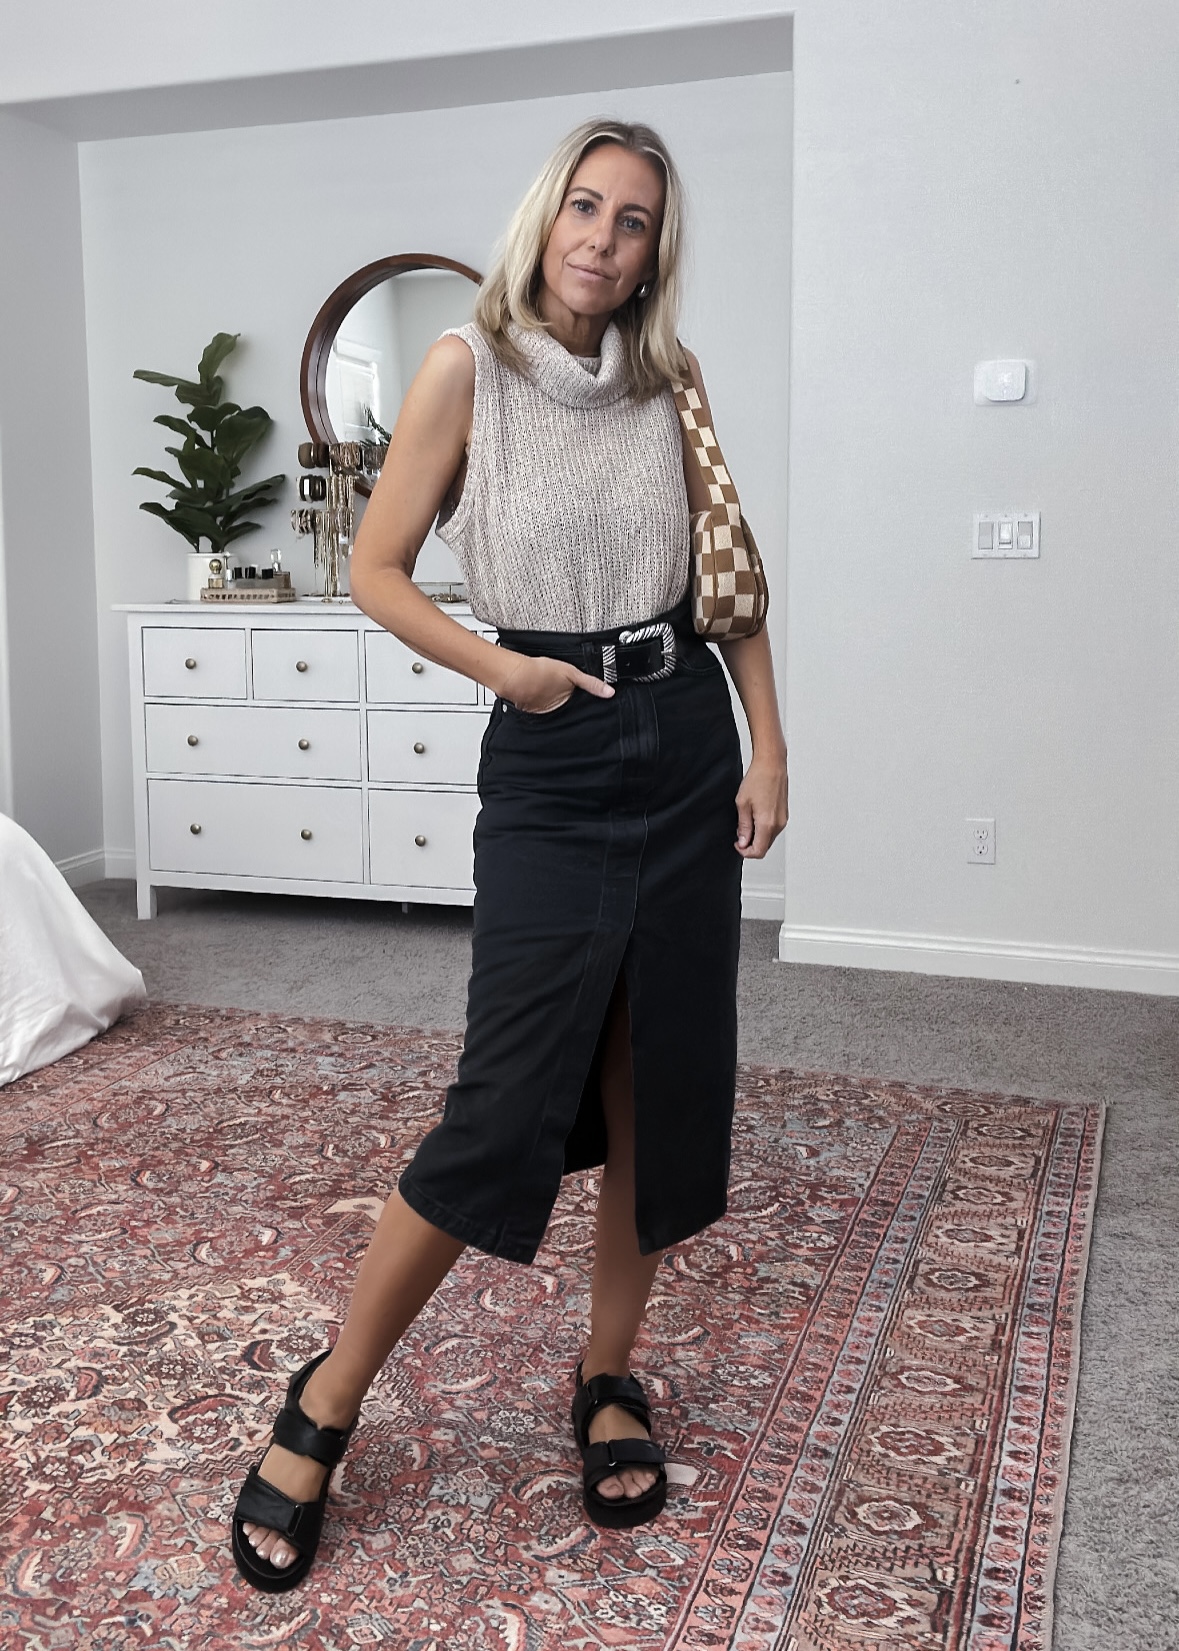 5 EASY OUTFITS WITH DENIM SKIRTS-Jaclyn De Leon style. Sharing a few easy looks that can work for all different occasions from dinner dates and work events to running errands.